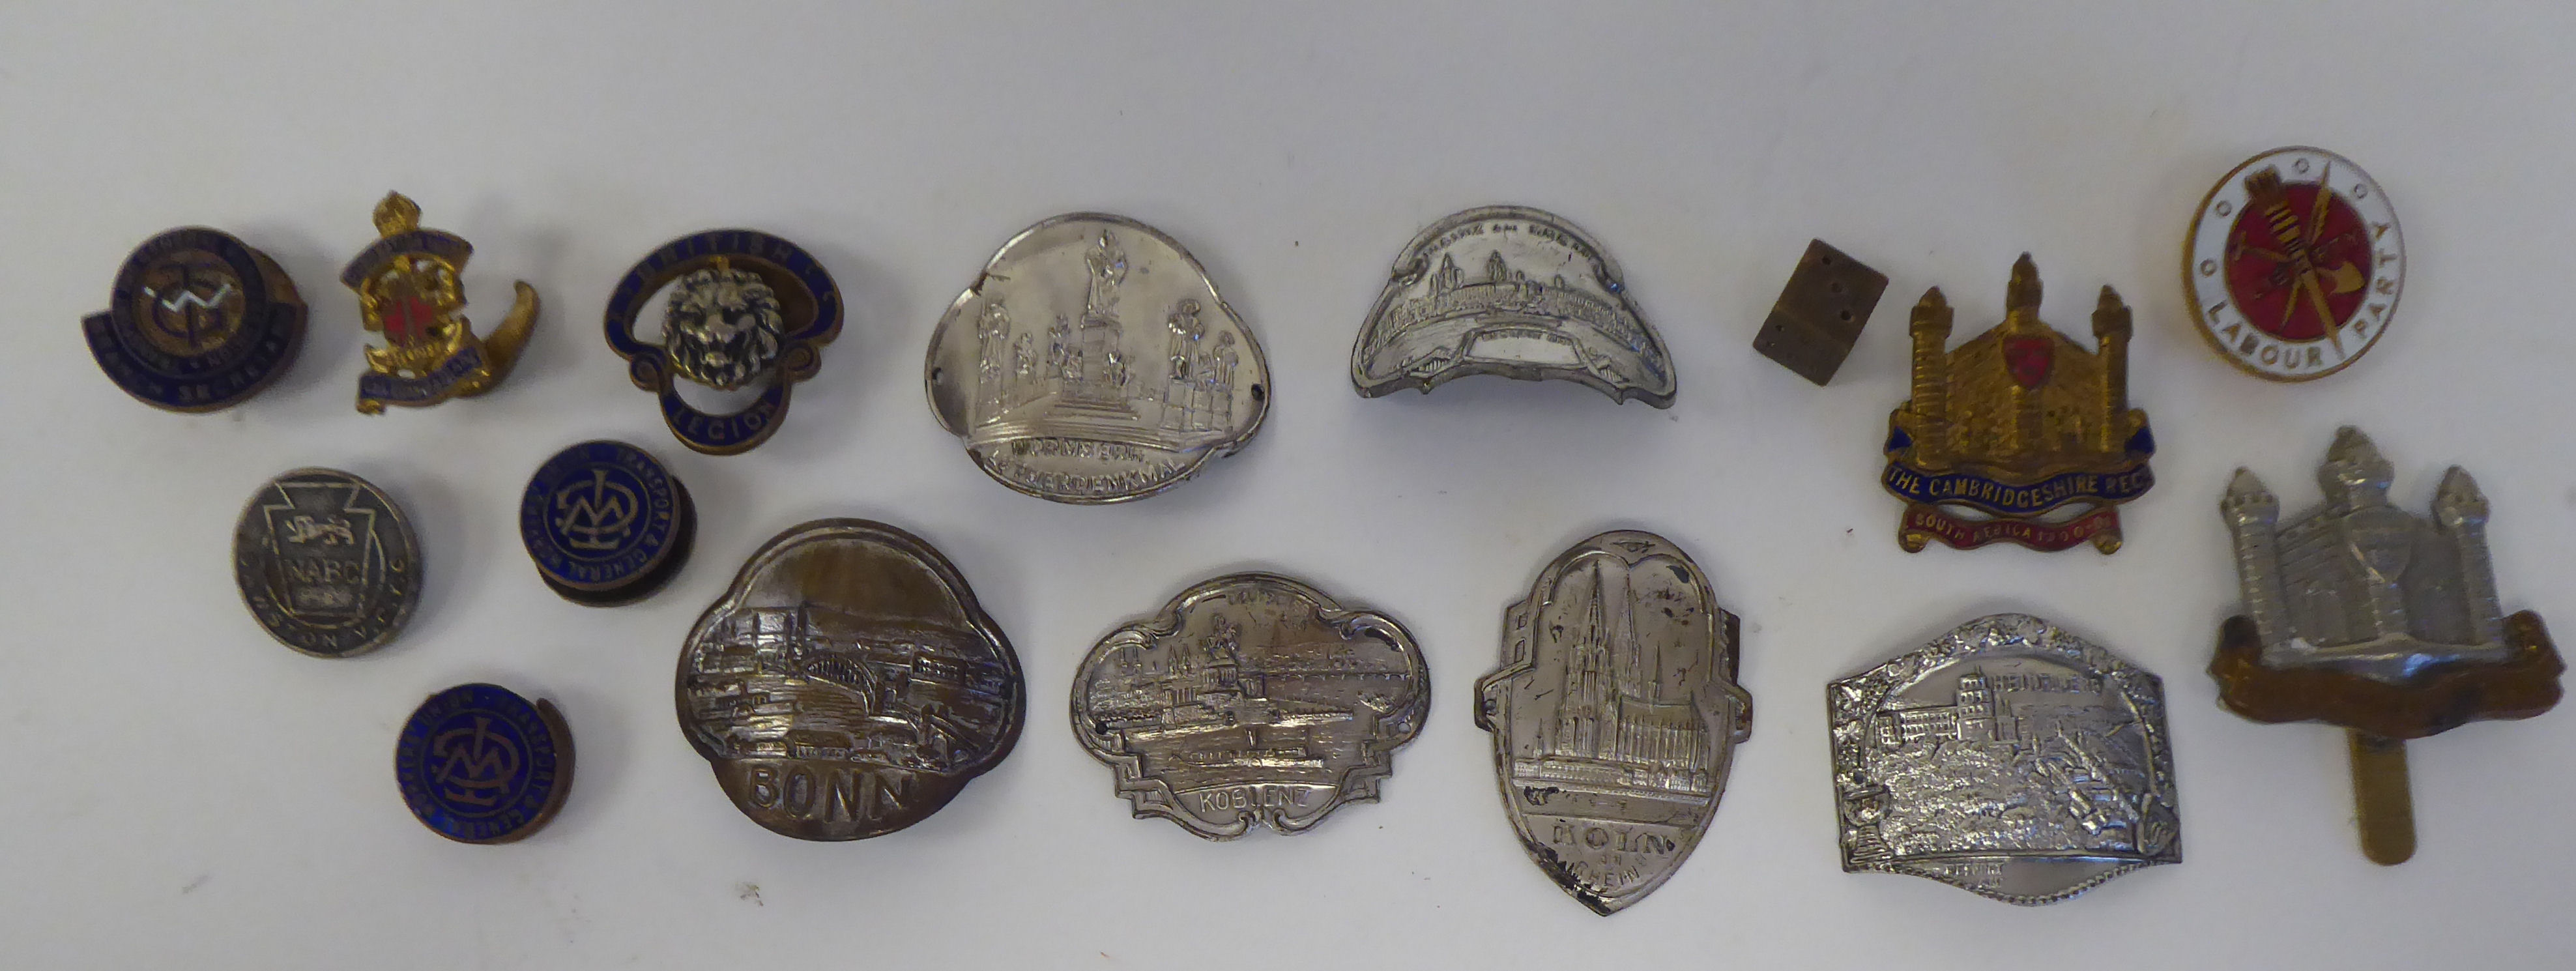 Uncollated coins and banknotes: to include British issues - Image 6 of 6